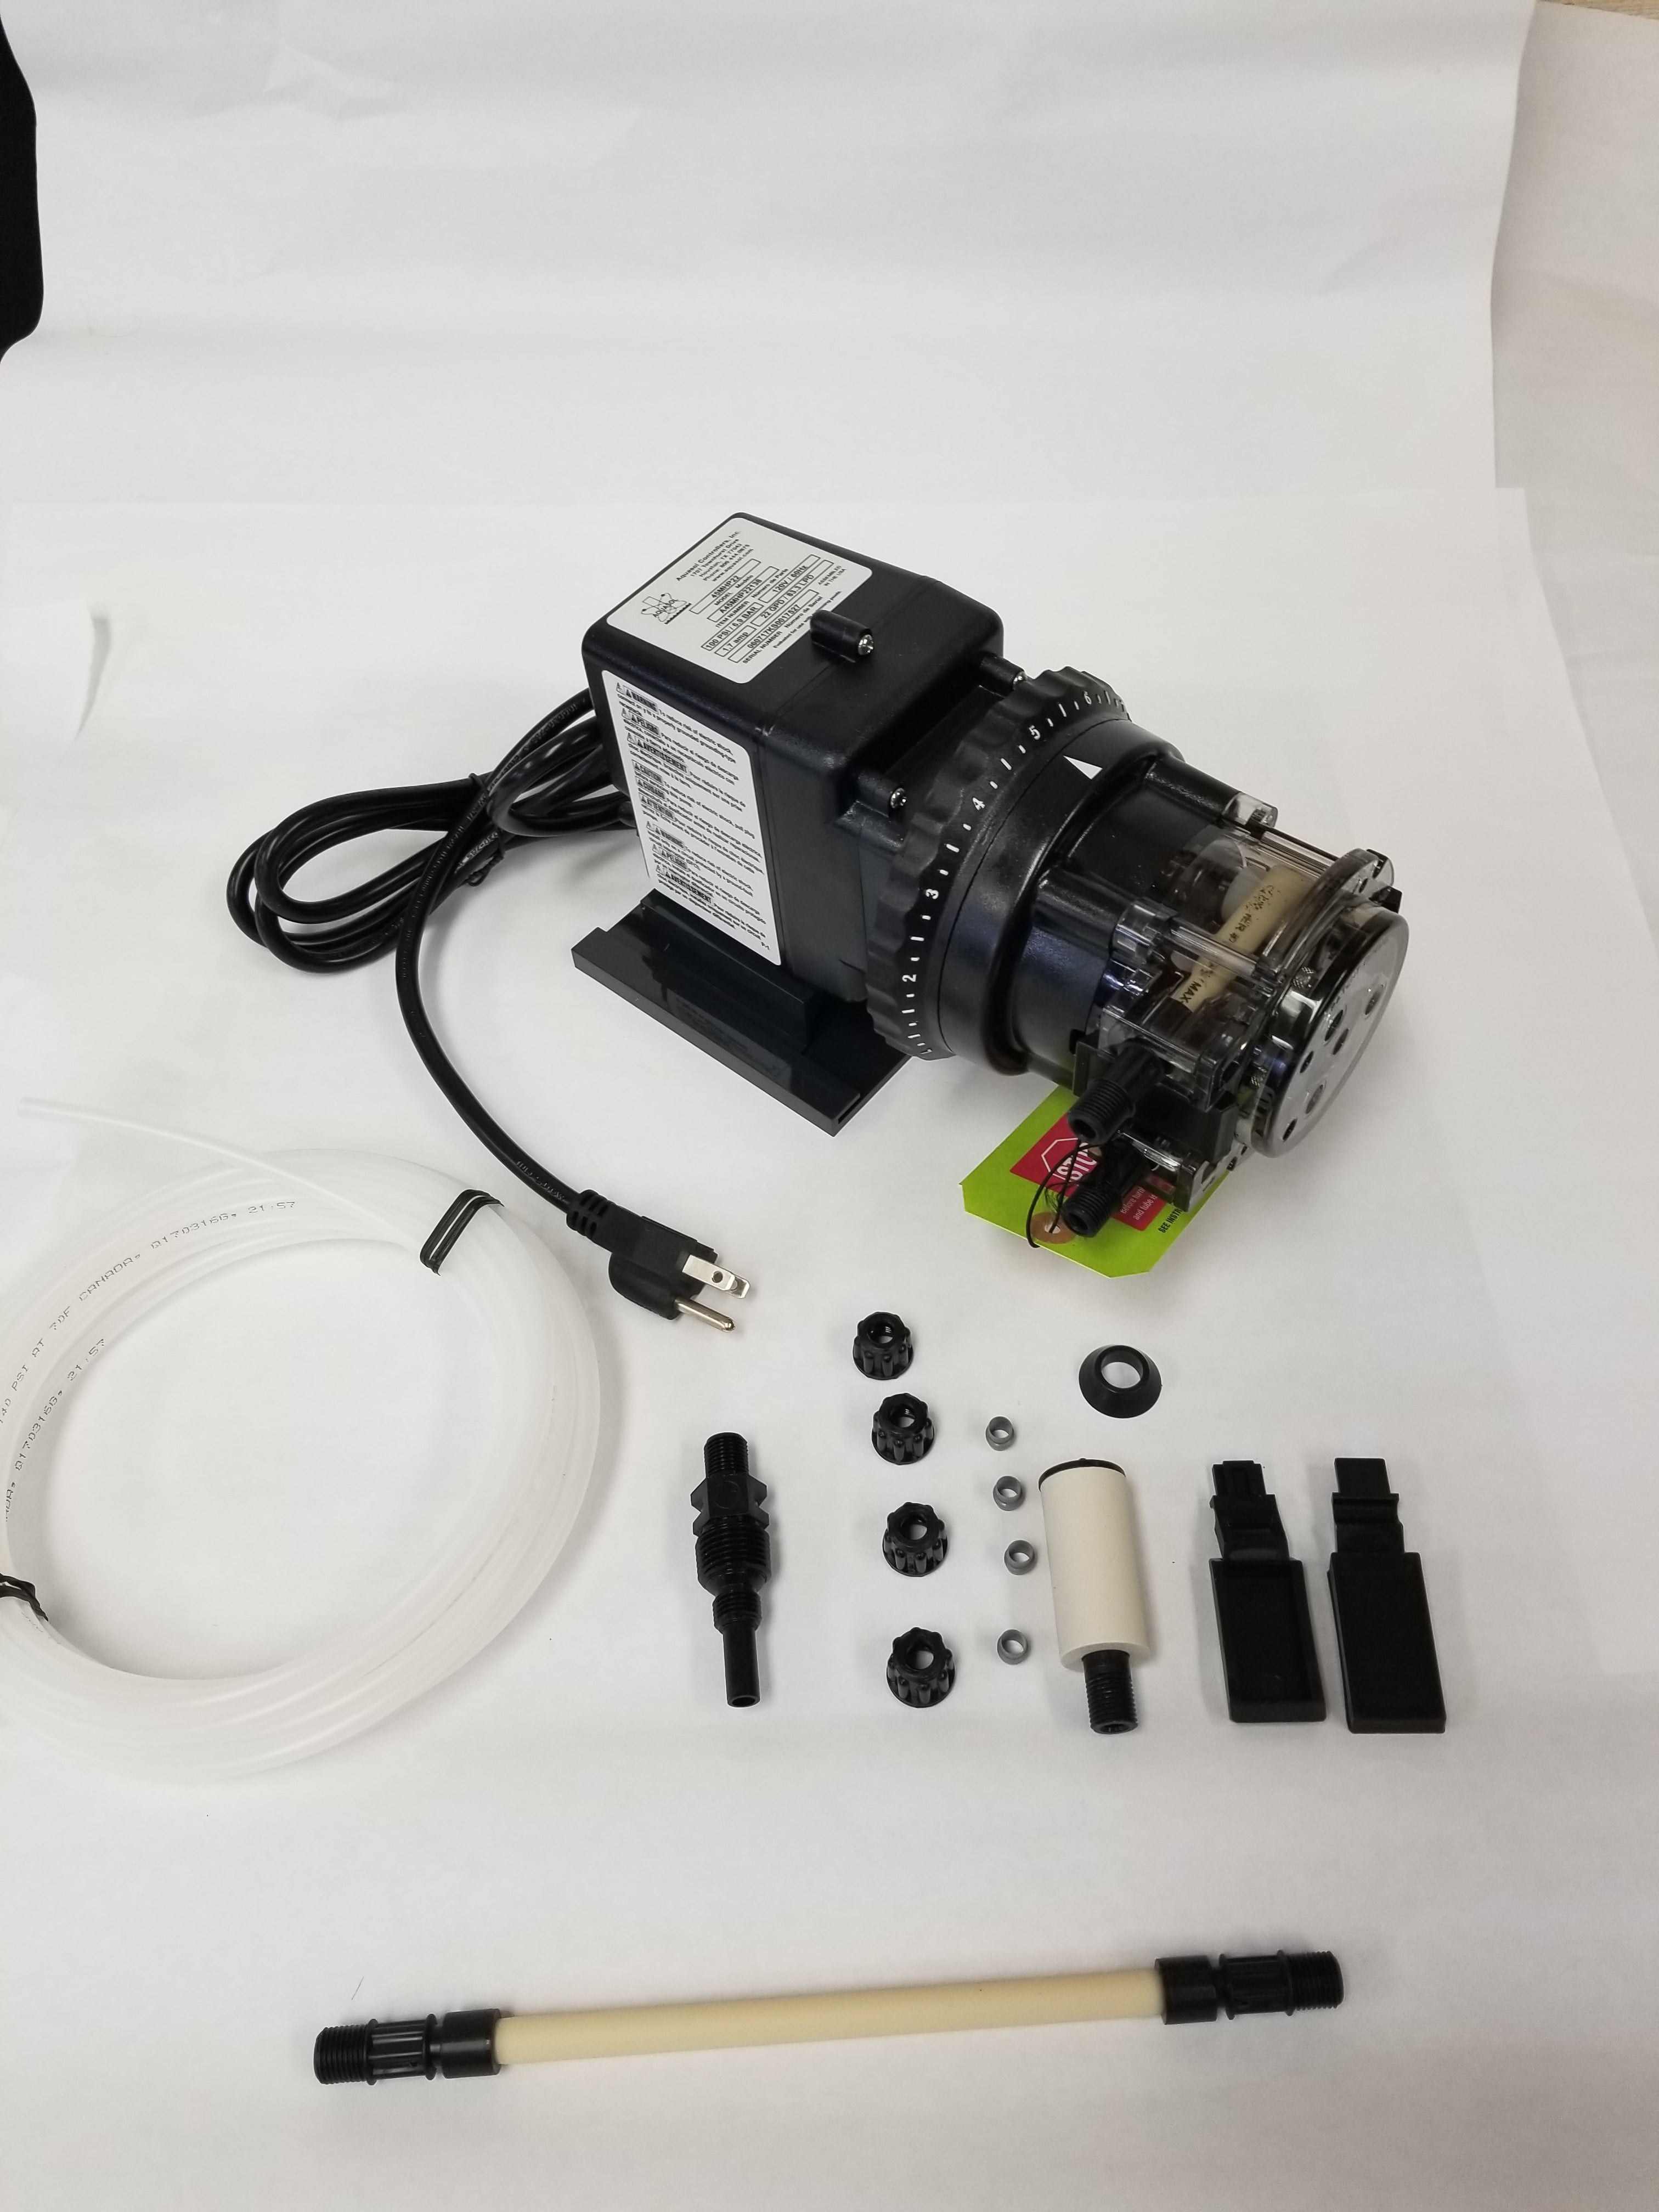 Rated at 17 gpd adjustable head 120 Volts Model number 85MFL2A4S - Ideal Chlorine Injection Pump Stenner Pump 85mp2 Stenner Peristaltic Pump Fixed Head Rated at 25 psi 